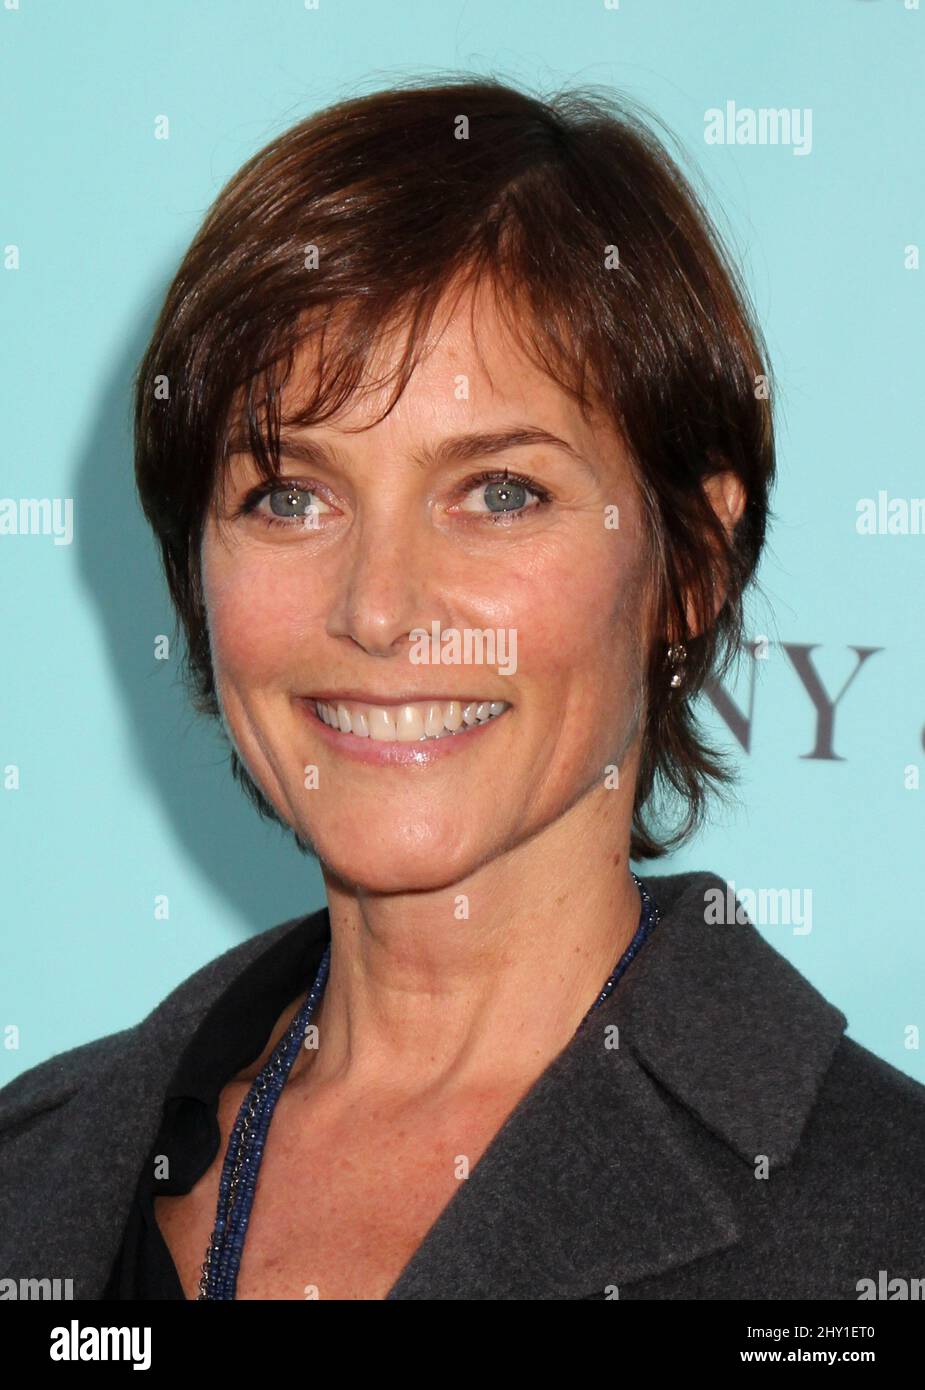 Carey Lowell attending the premiere of 